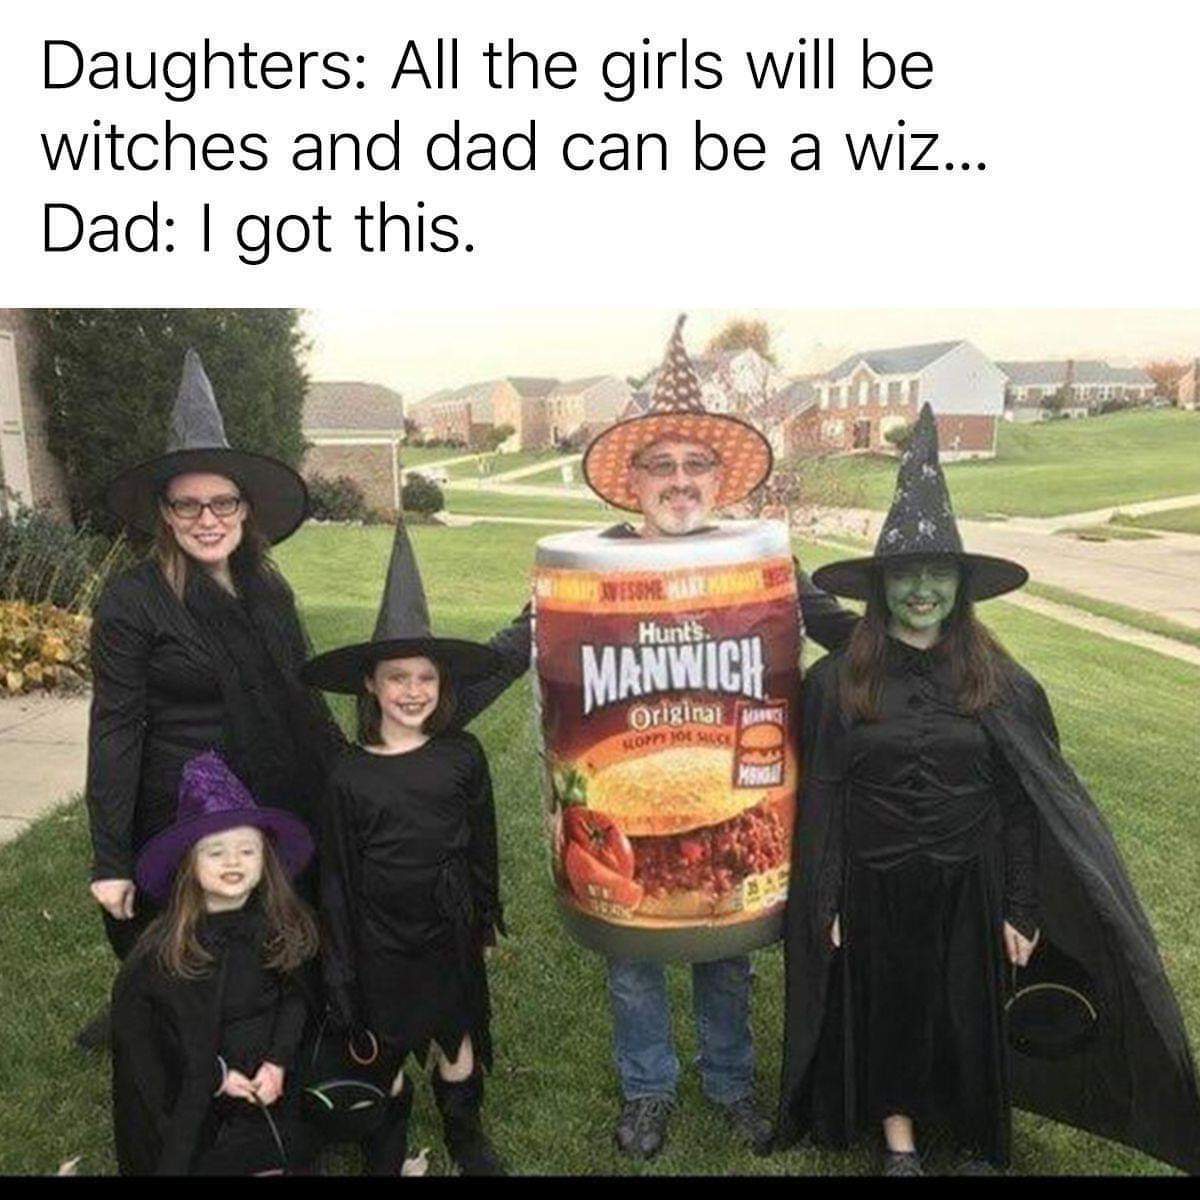 funny pic witch manwich - Daughters All the girls will be witches and dad can be a wiz... Dad I got this. S Essme Hunt's. Manwich original orn Ece